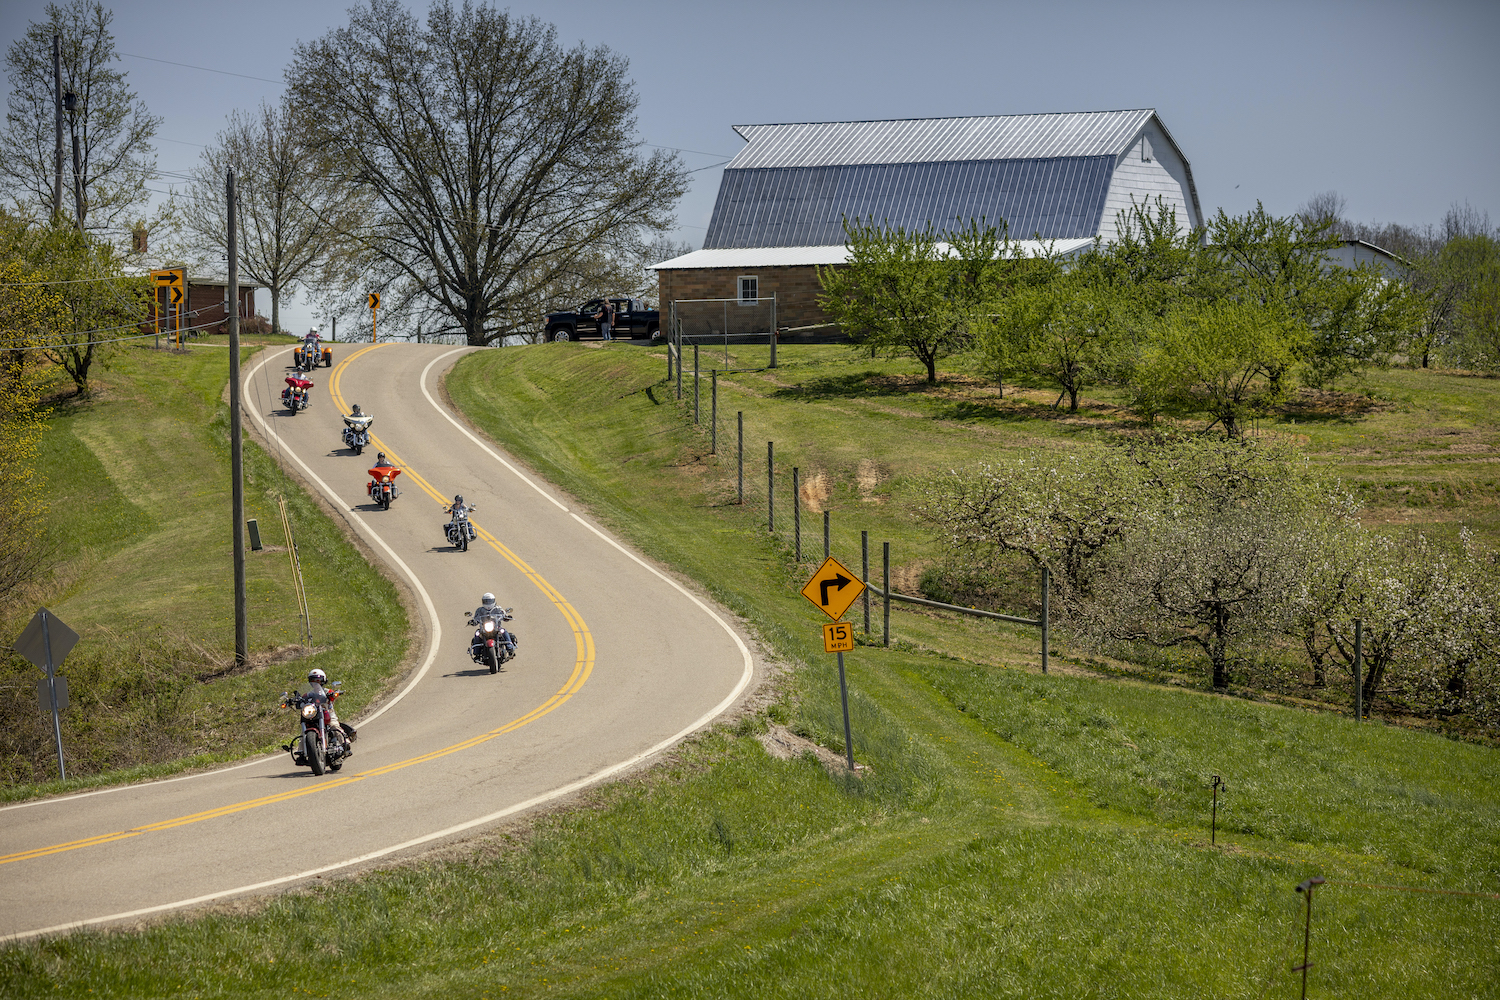 Enjoy the "Southern Dip" section of one of Ohio's Windy 9 routes with your fellow riders. 